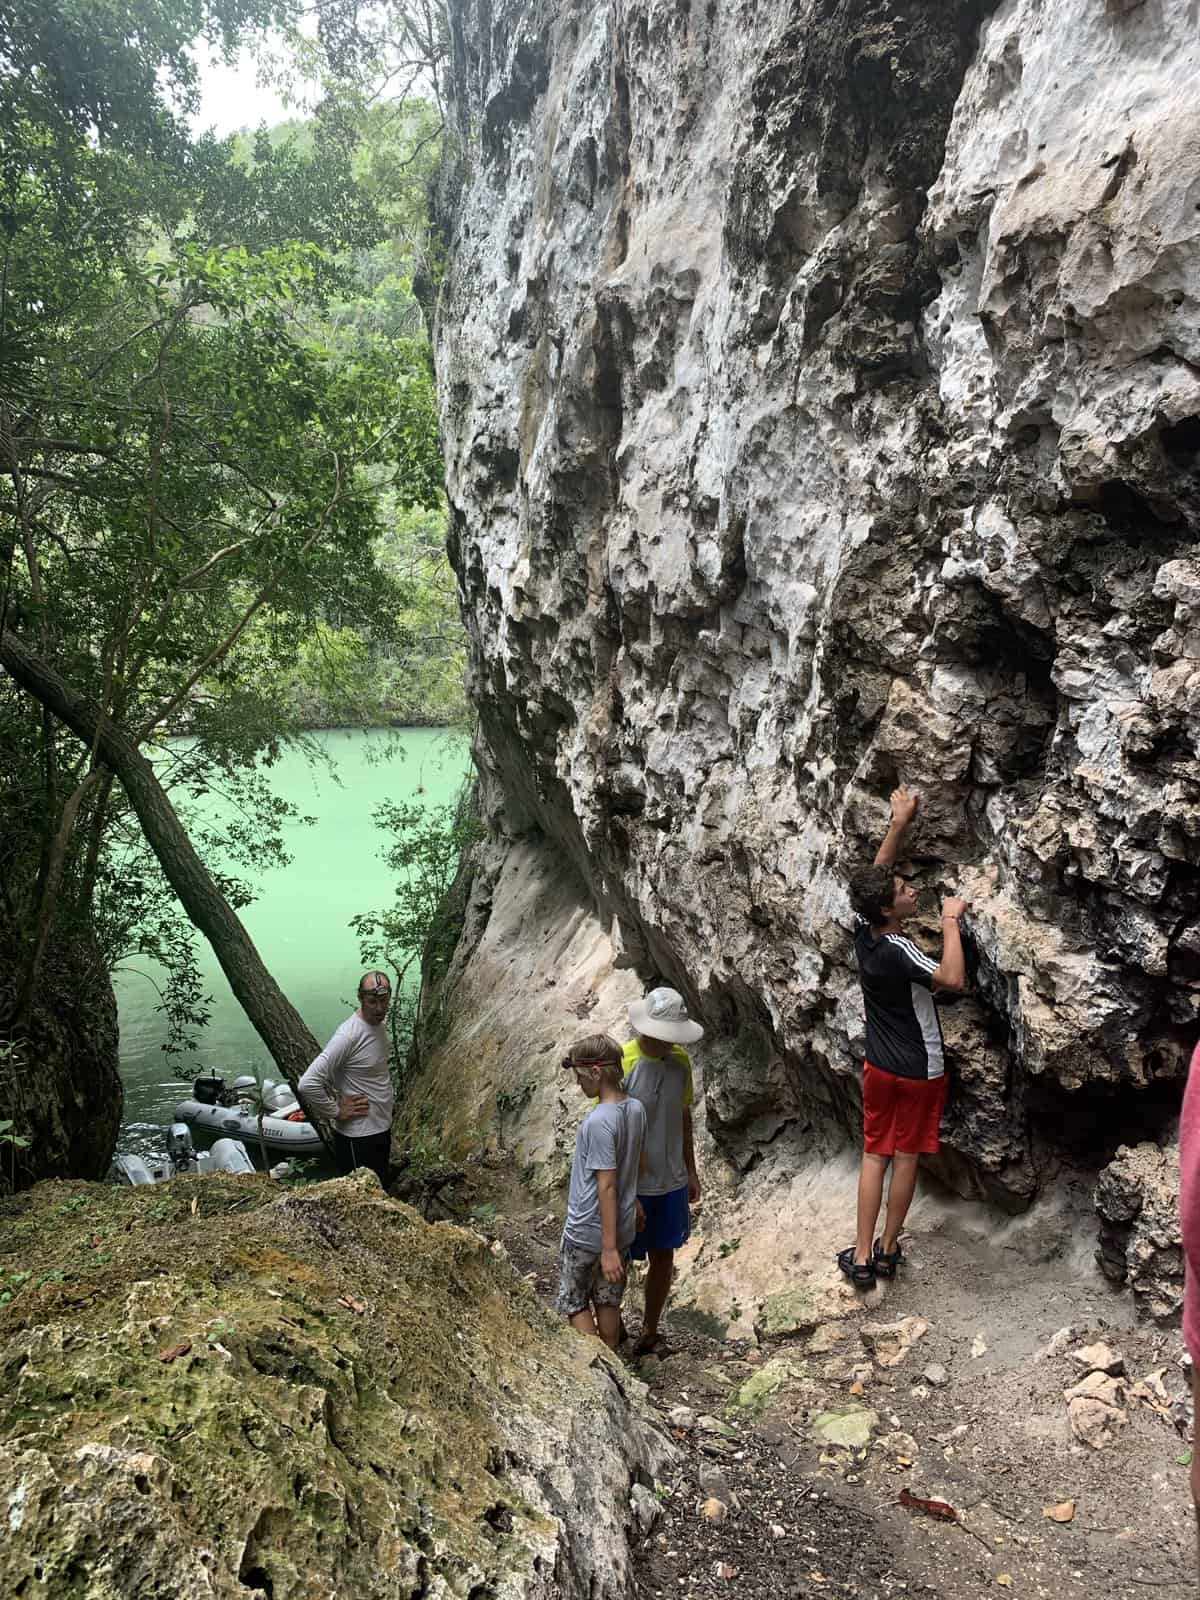 Exploring a cave in Los Haitises National Park, Dominican Republic.